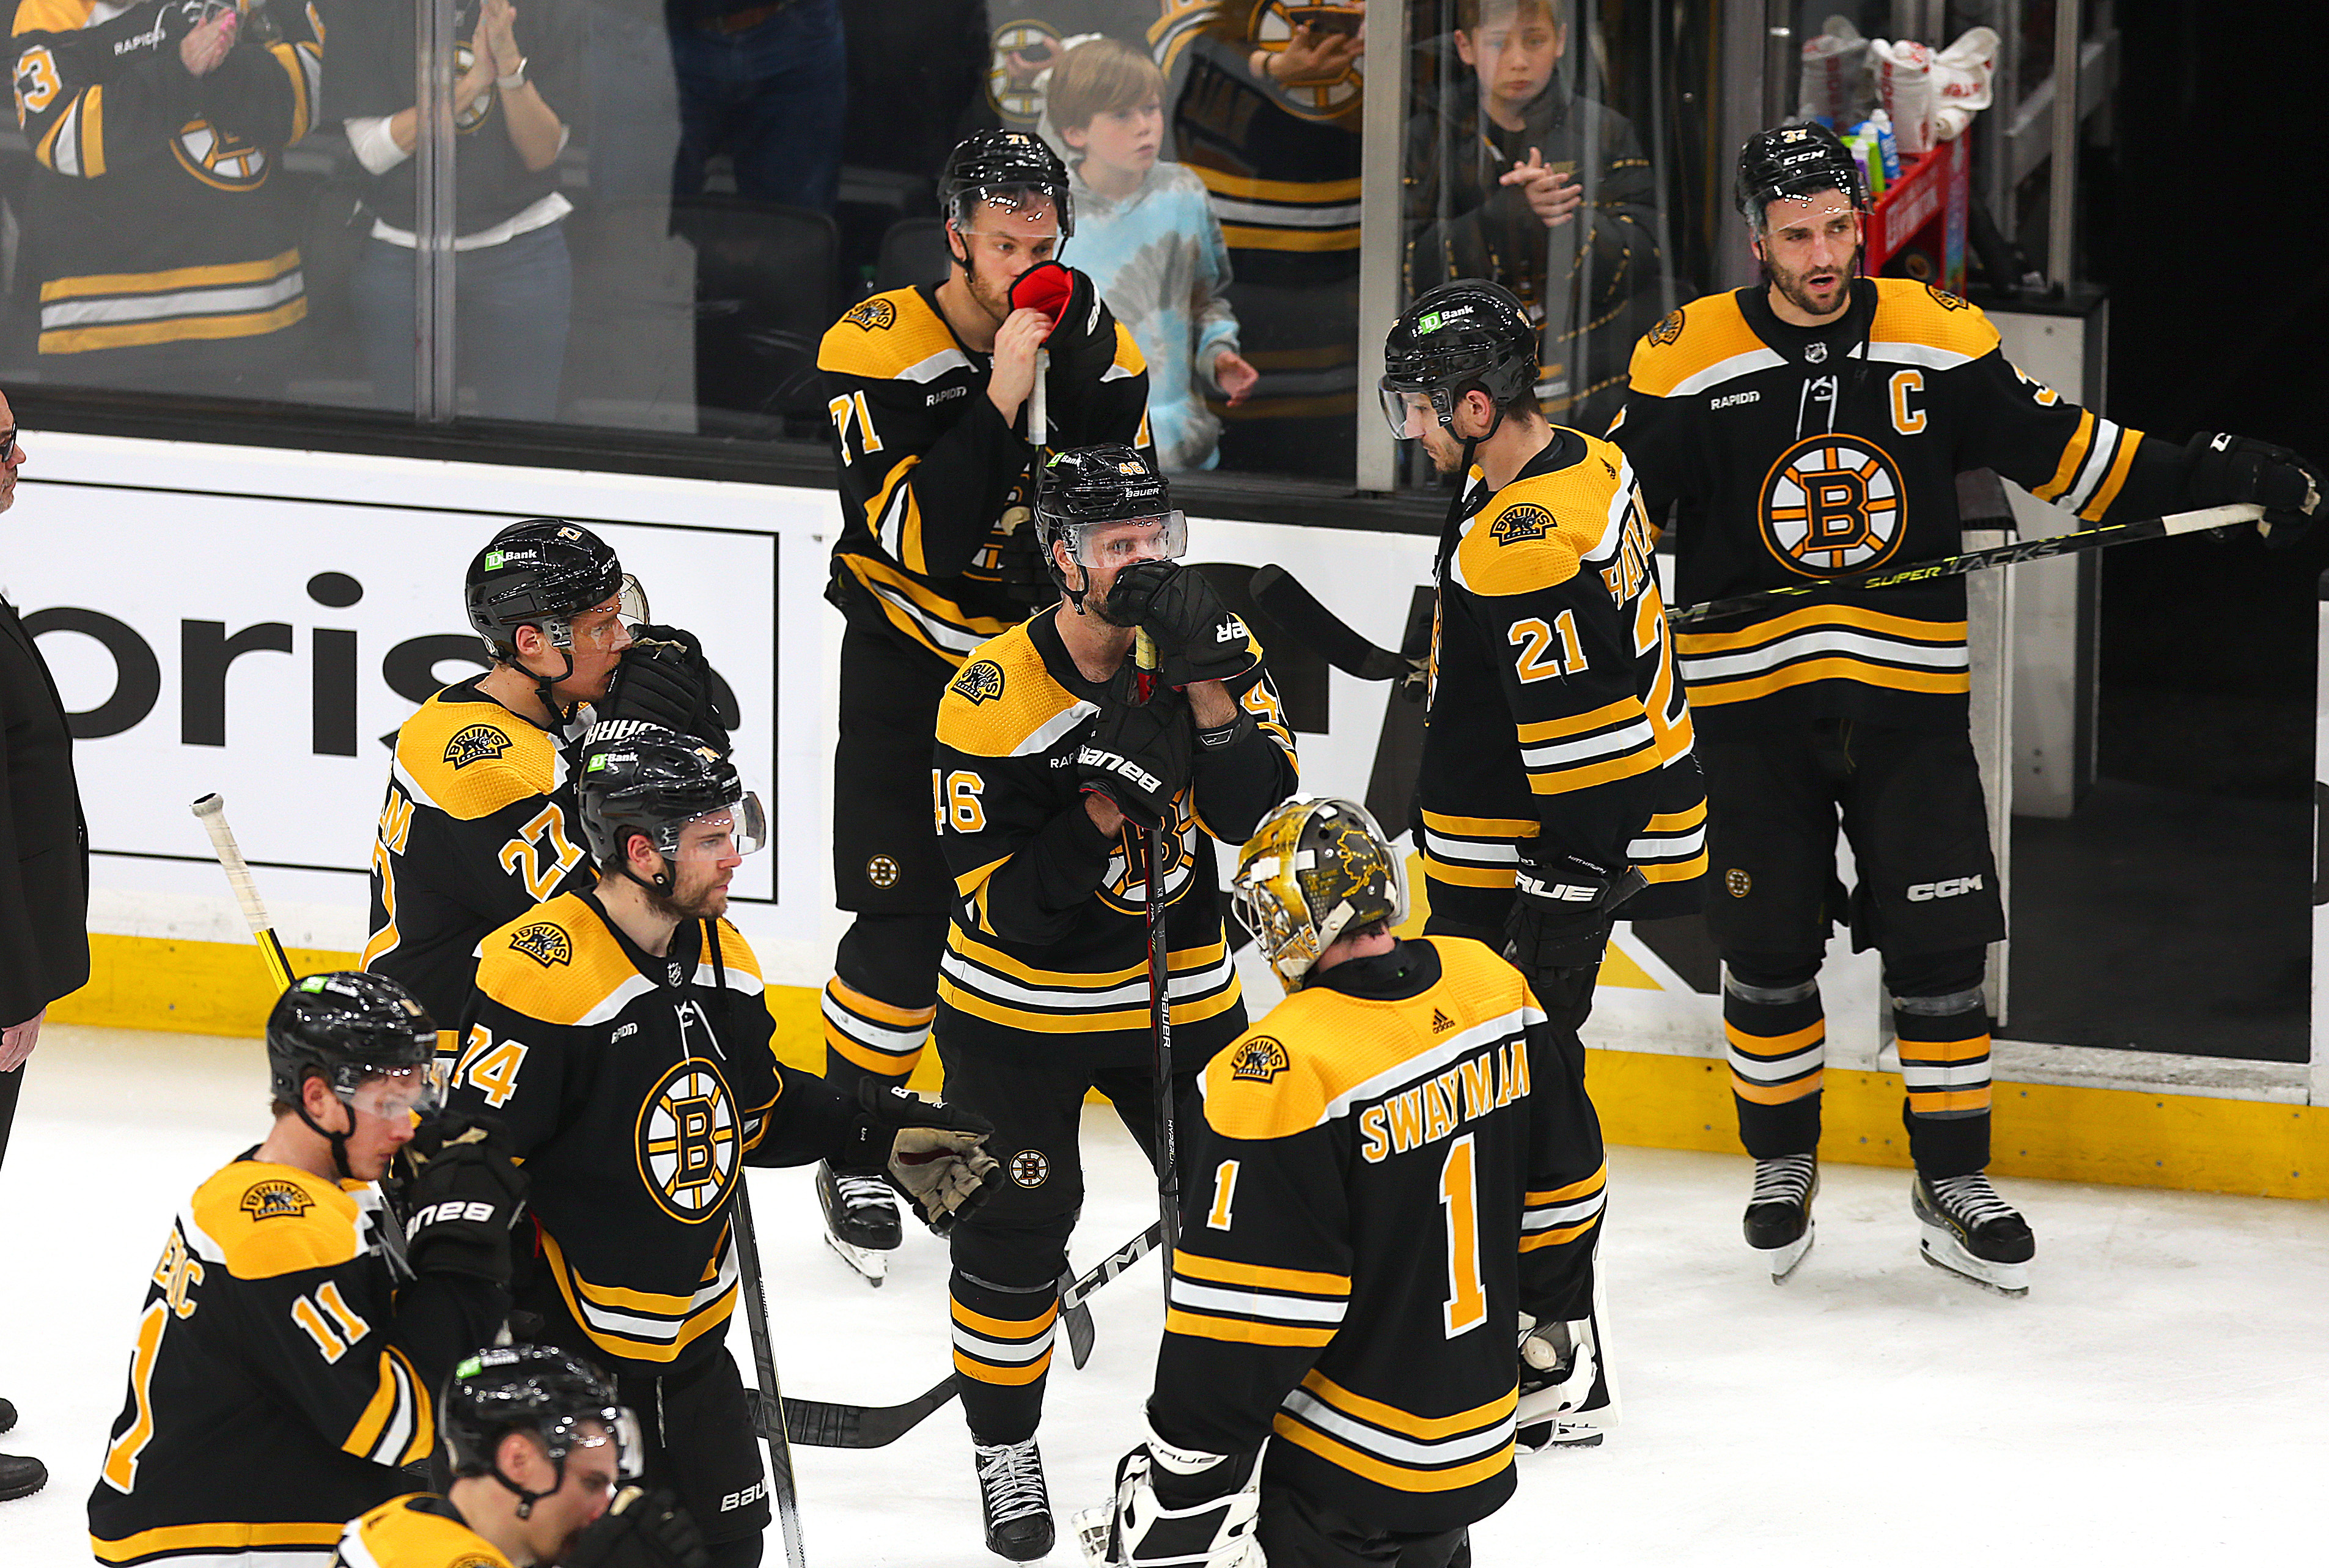 Bruins send strong message to fans after historic collapse in